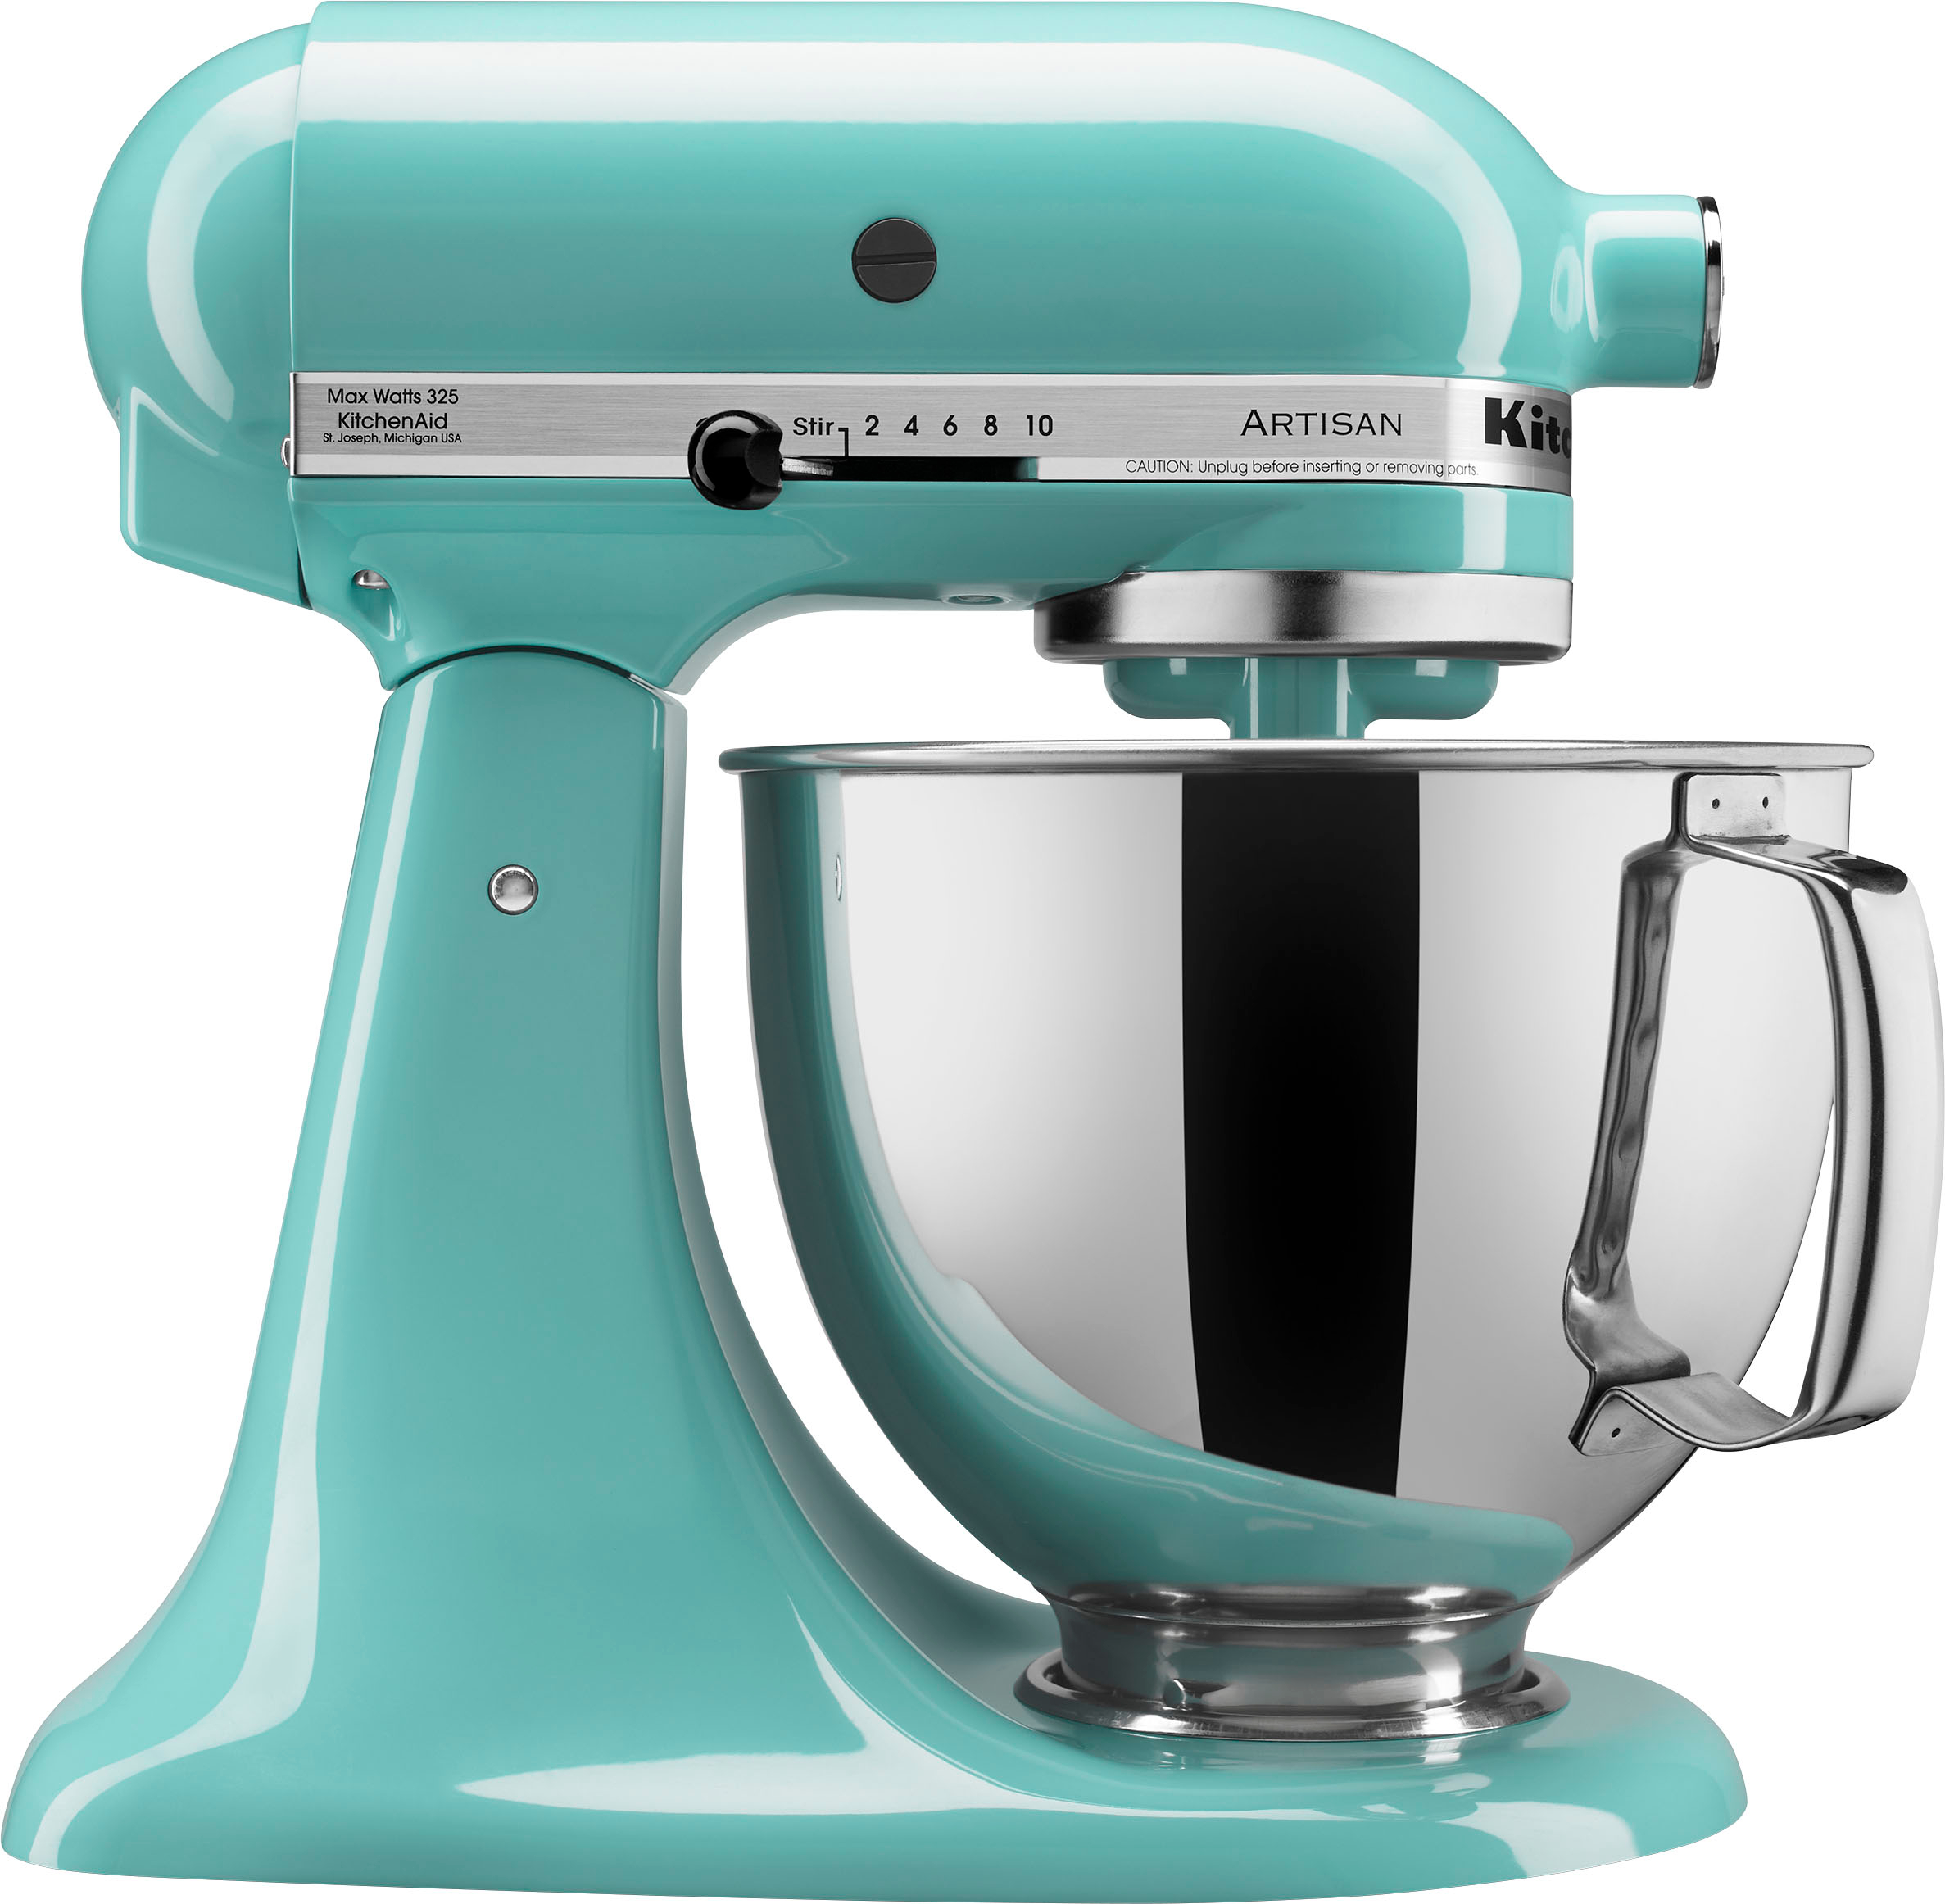 Kitchen Aid Artisan Mini Mixer Review available at Best Buy